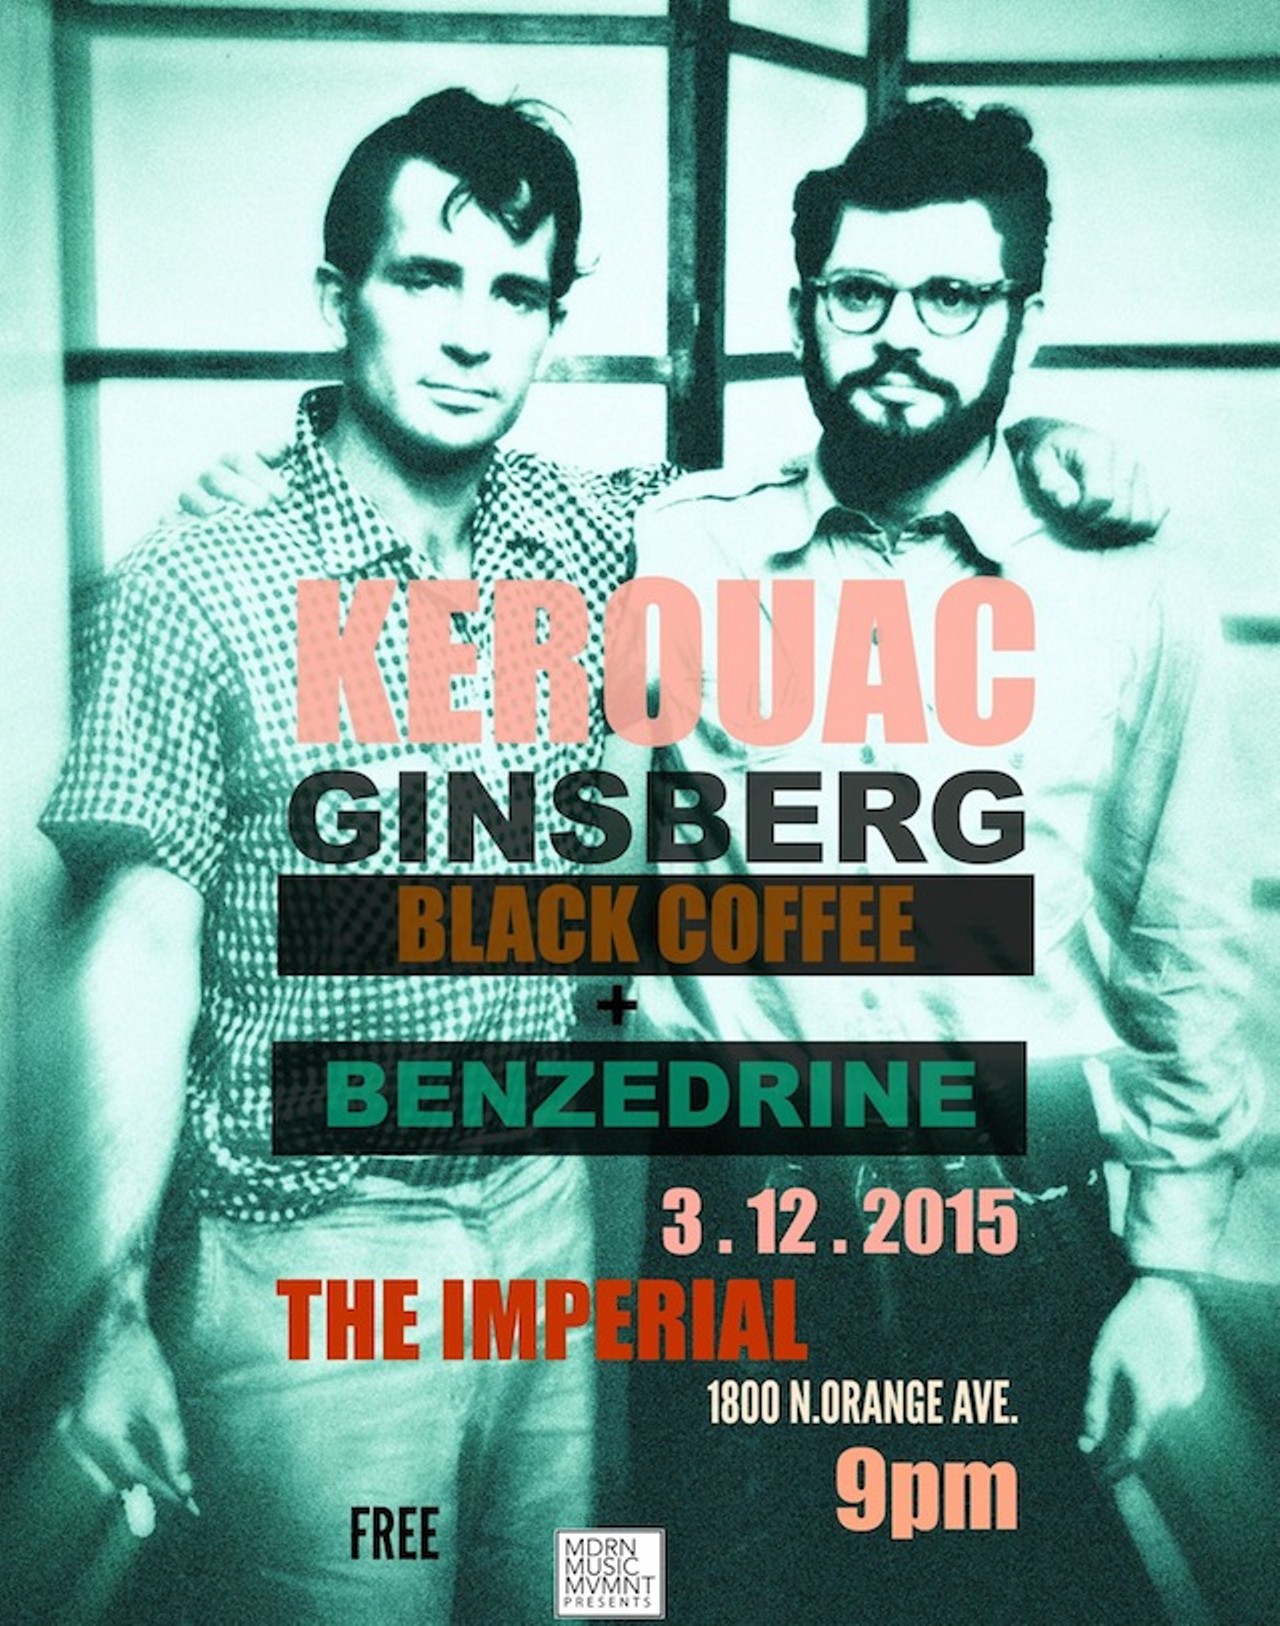 Thursday, March 12Black Coffee and Benzedrine: Kerouac and Ginsberg Reading